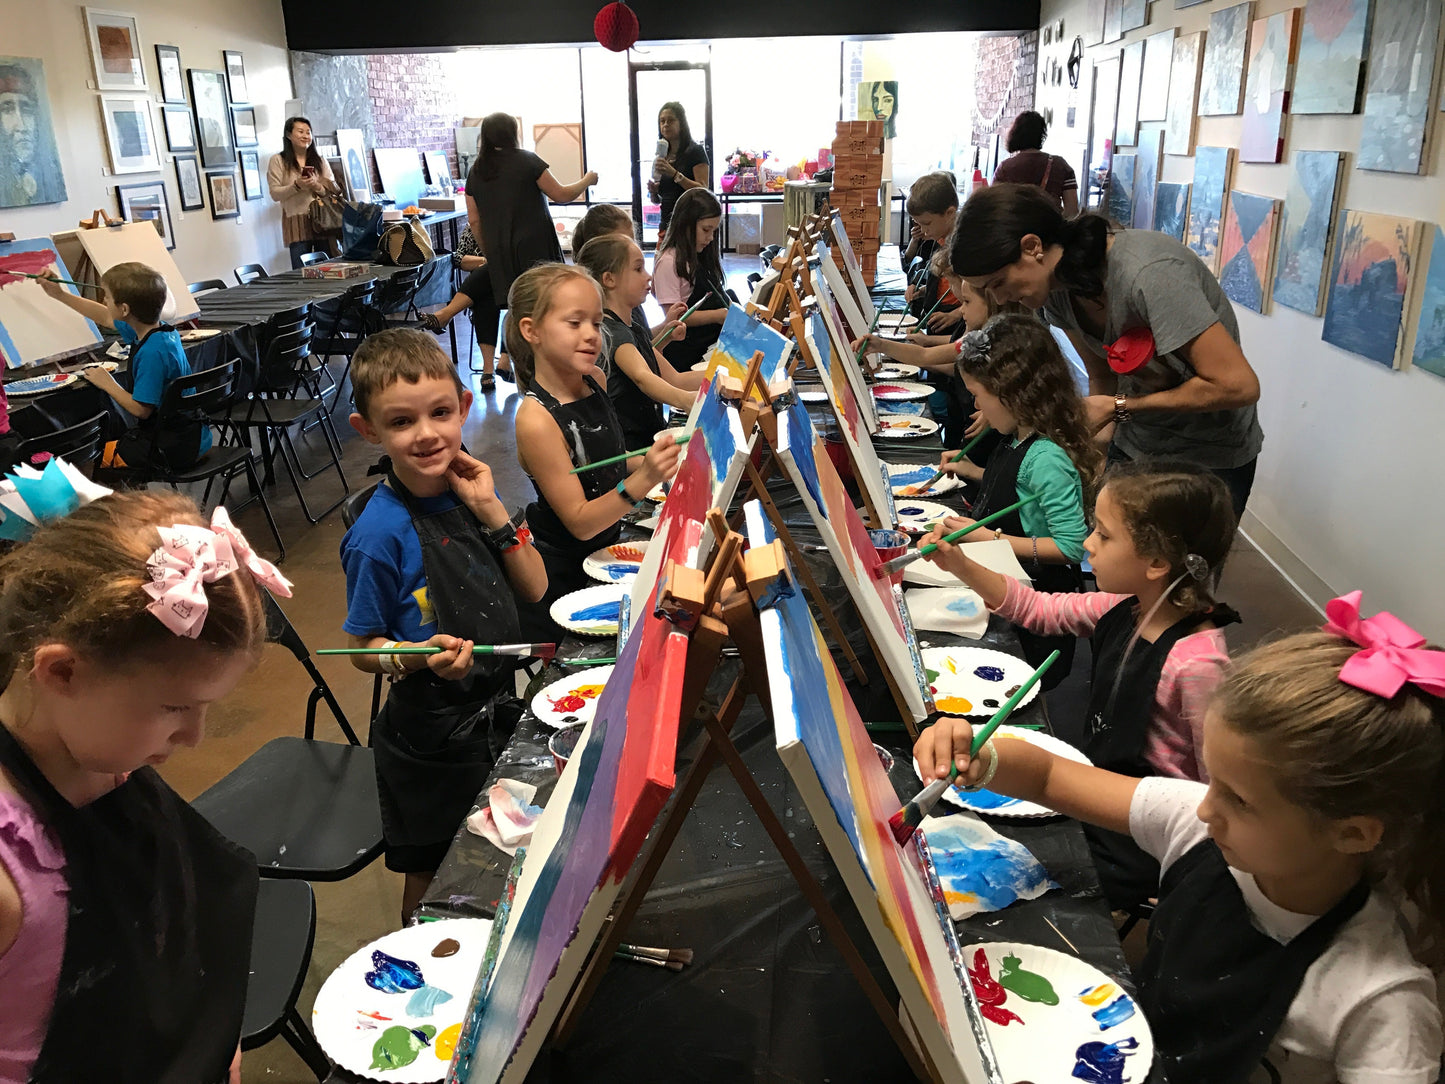 Wed, Jun 21st, 6-8P “Bunny's Day” Private Houston Kids Painting Party